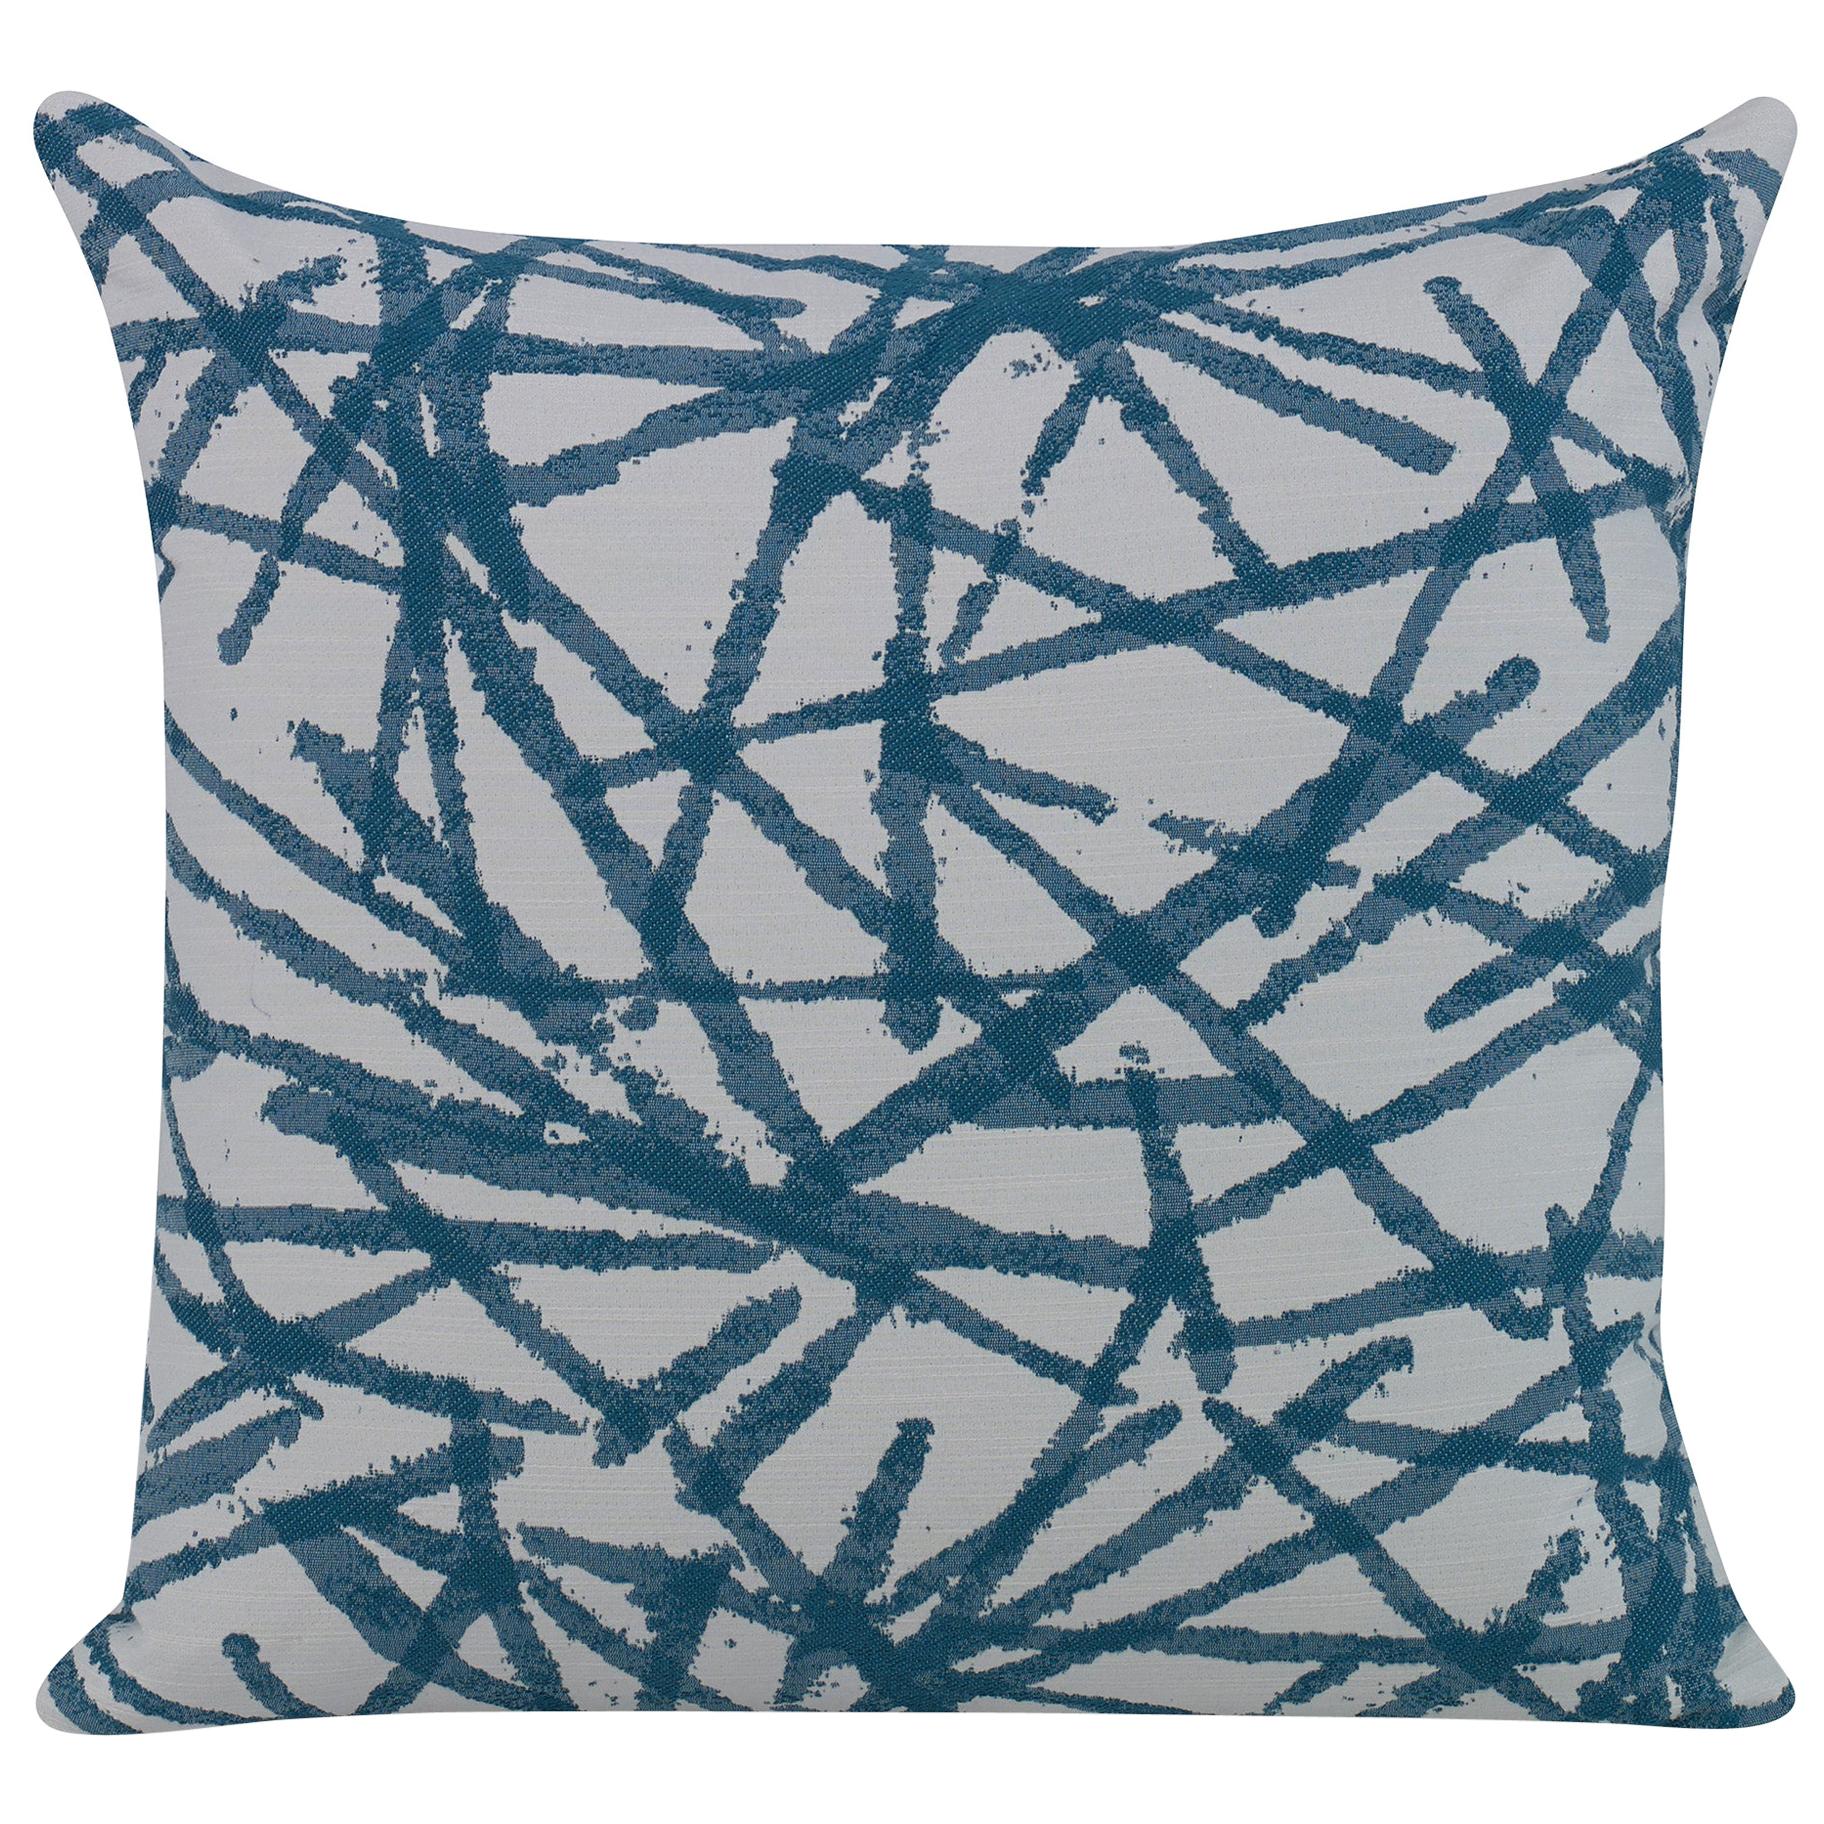 Strobelite Pillow in Teal and White by CuratedKravet